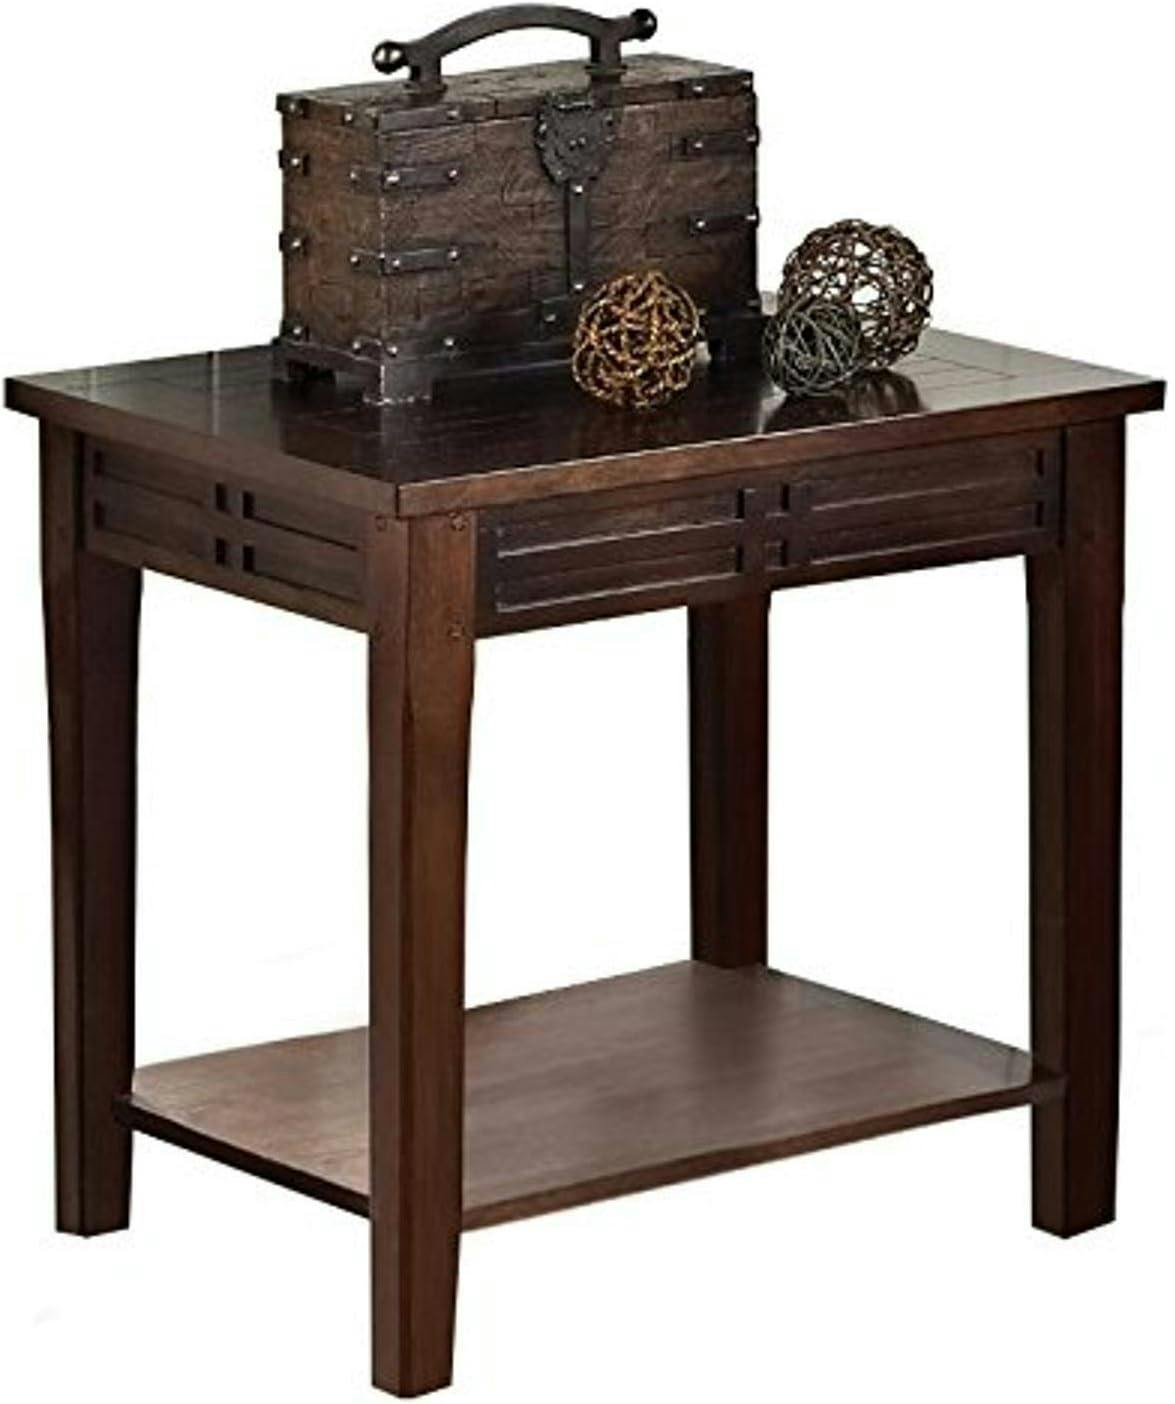 Crestline Transitional Brown Wood End Table with Storage